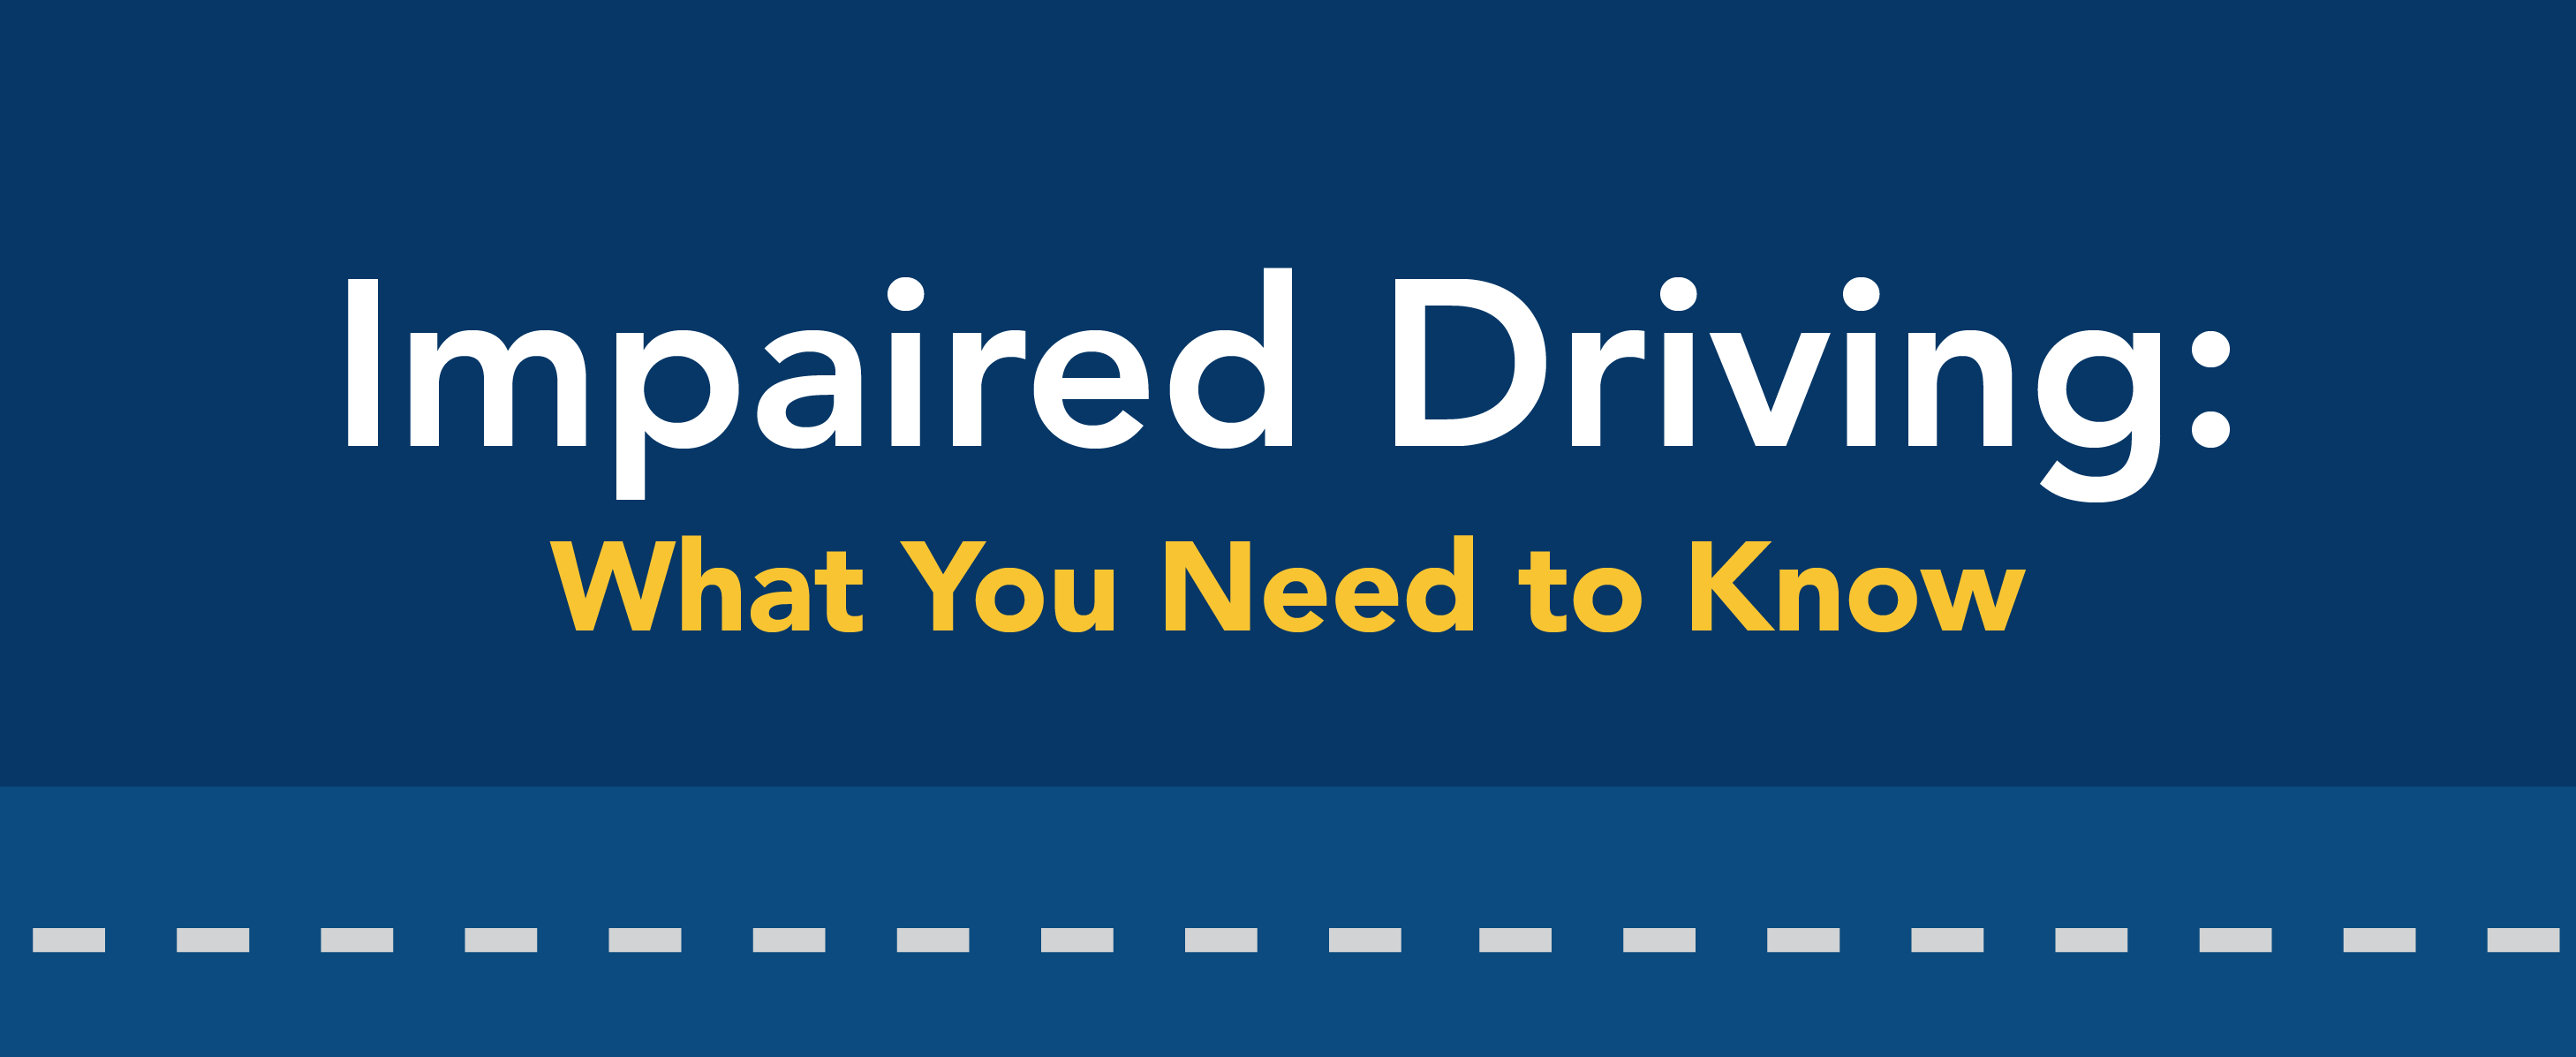 Impaired driving: what you need to know.